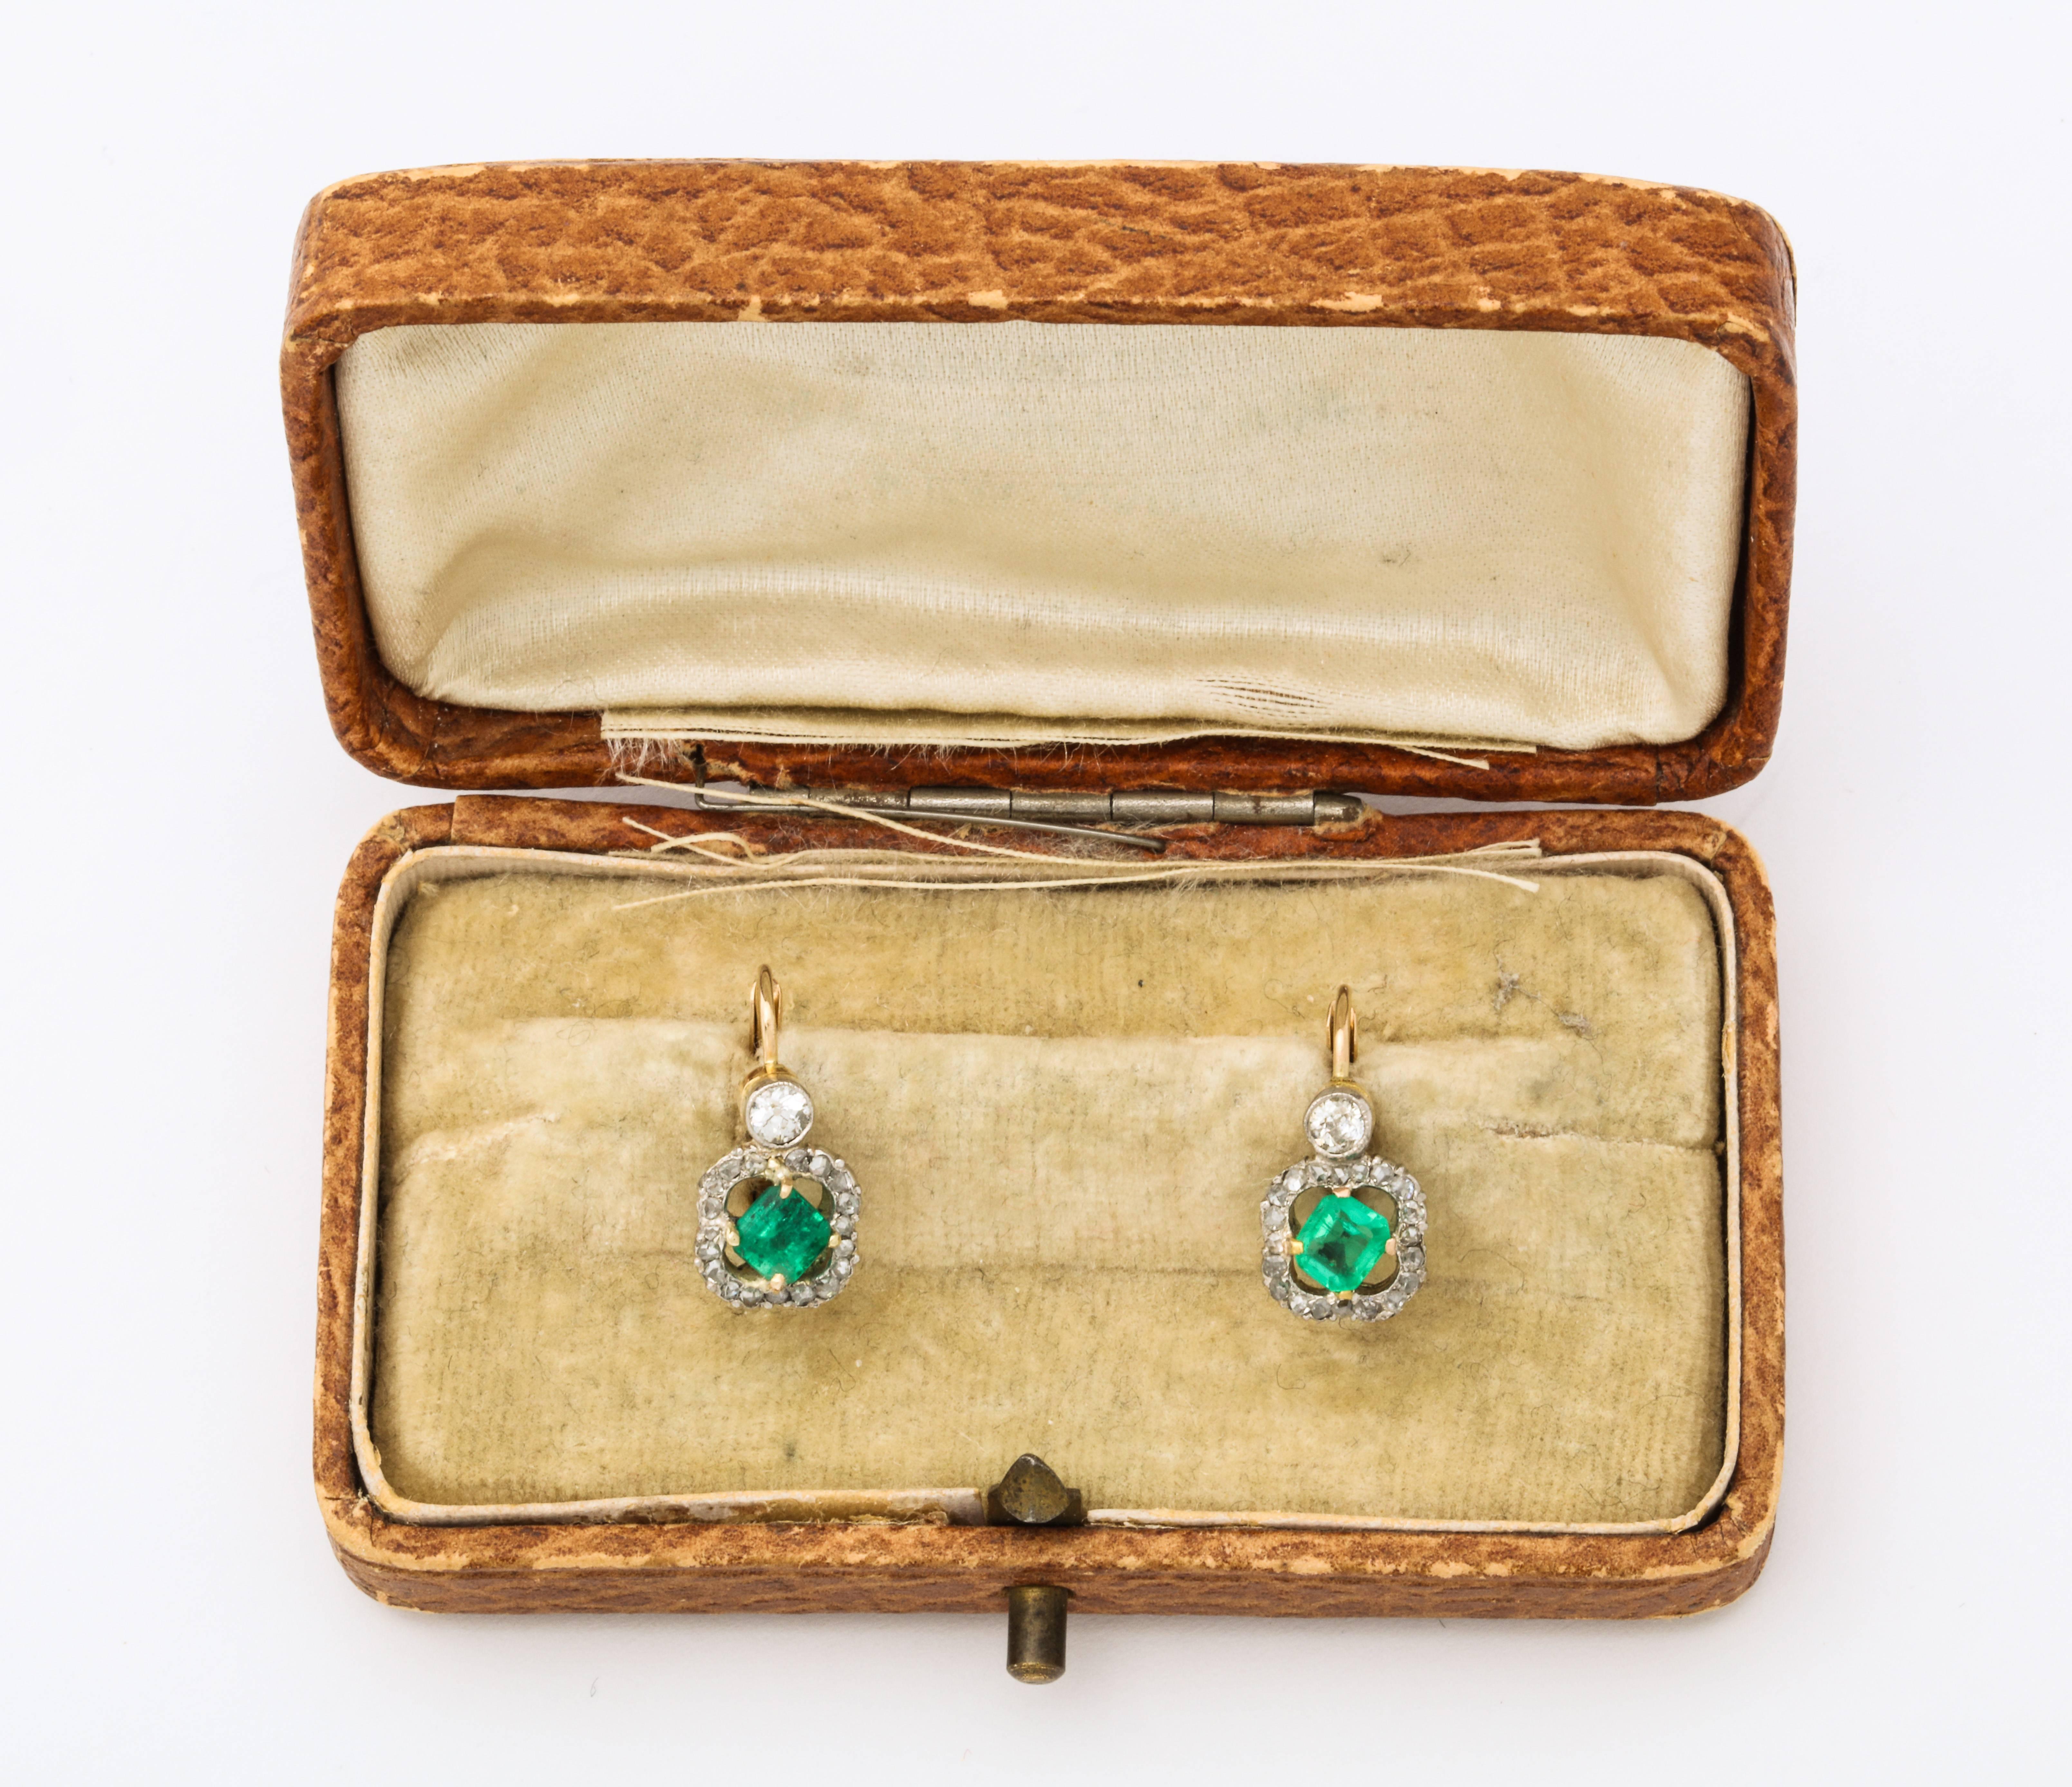 A delicate pair of natural Colombian square cut emeralds surrounded by a ring of diamonds and suspended from bezel set round diamonds in 18K gold  with lever closures.  